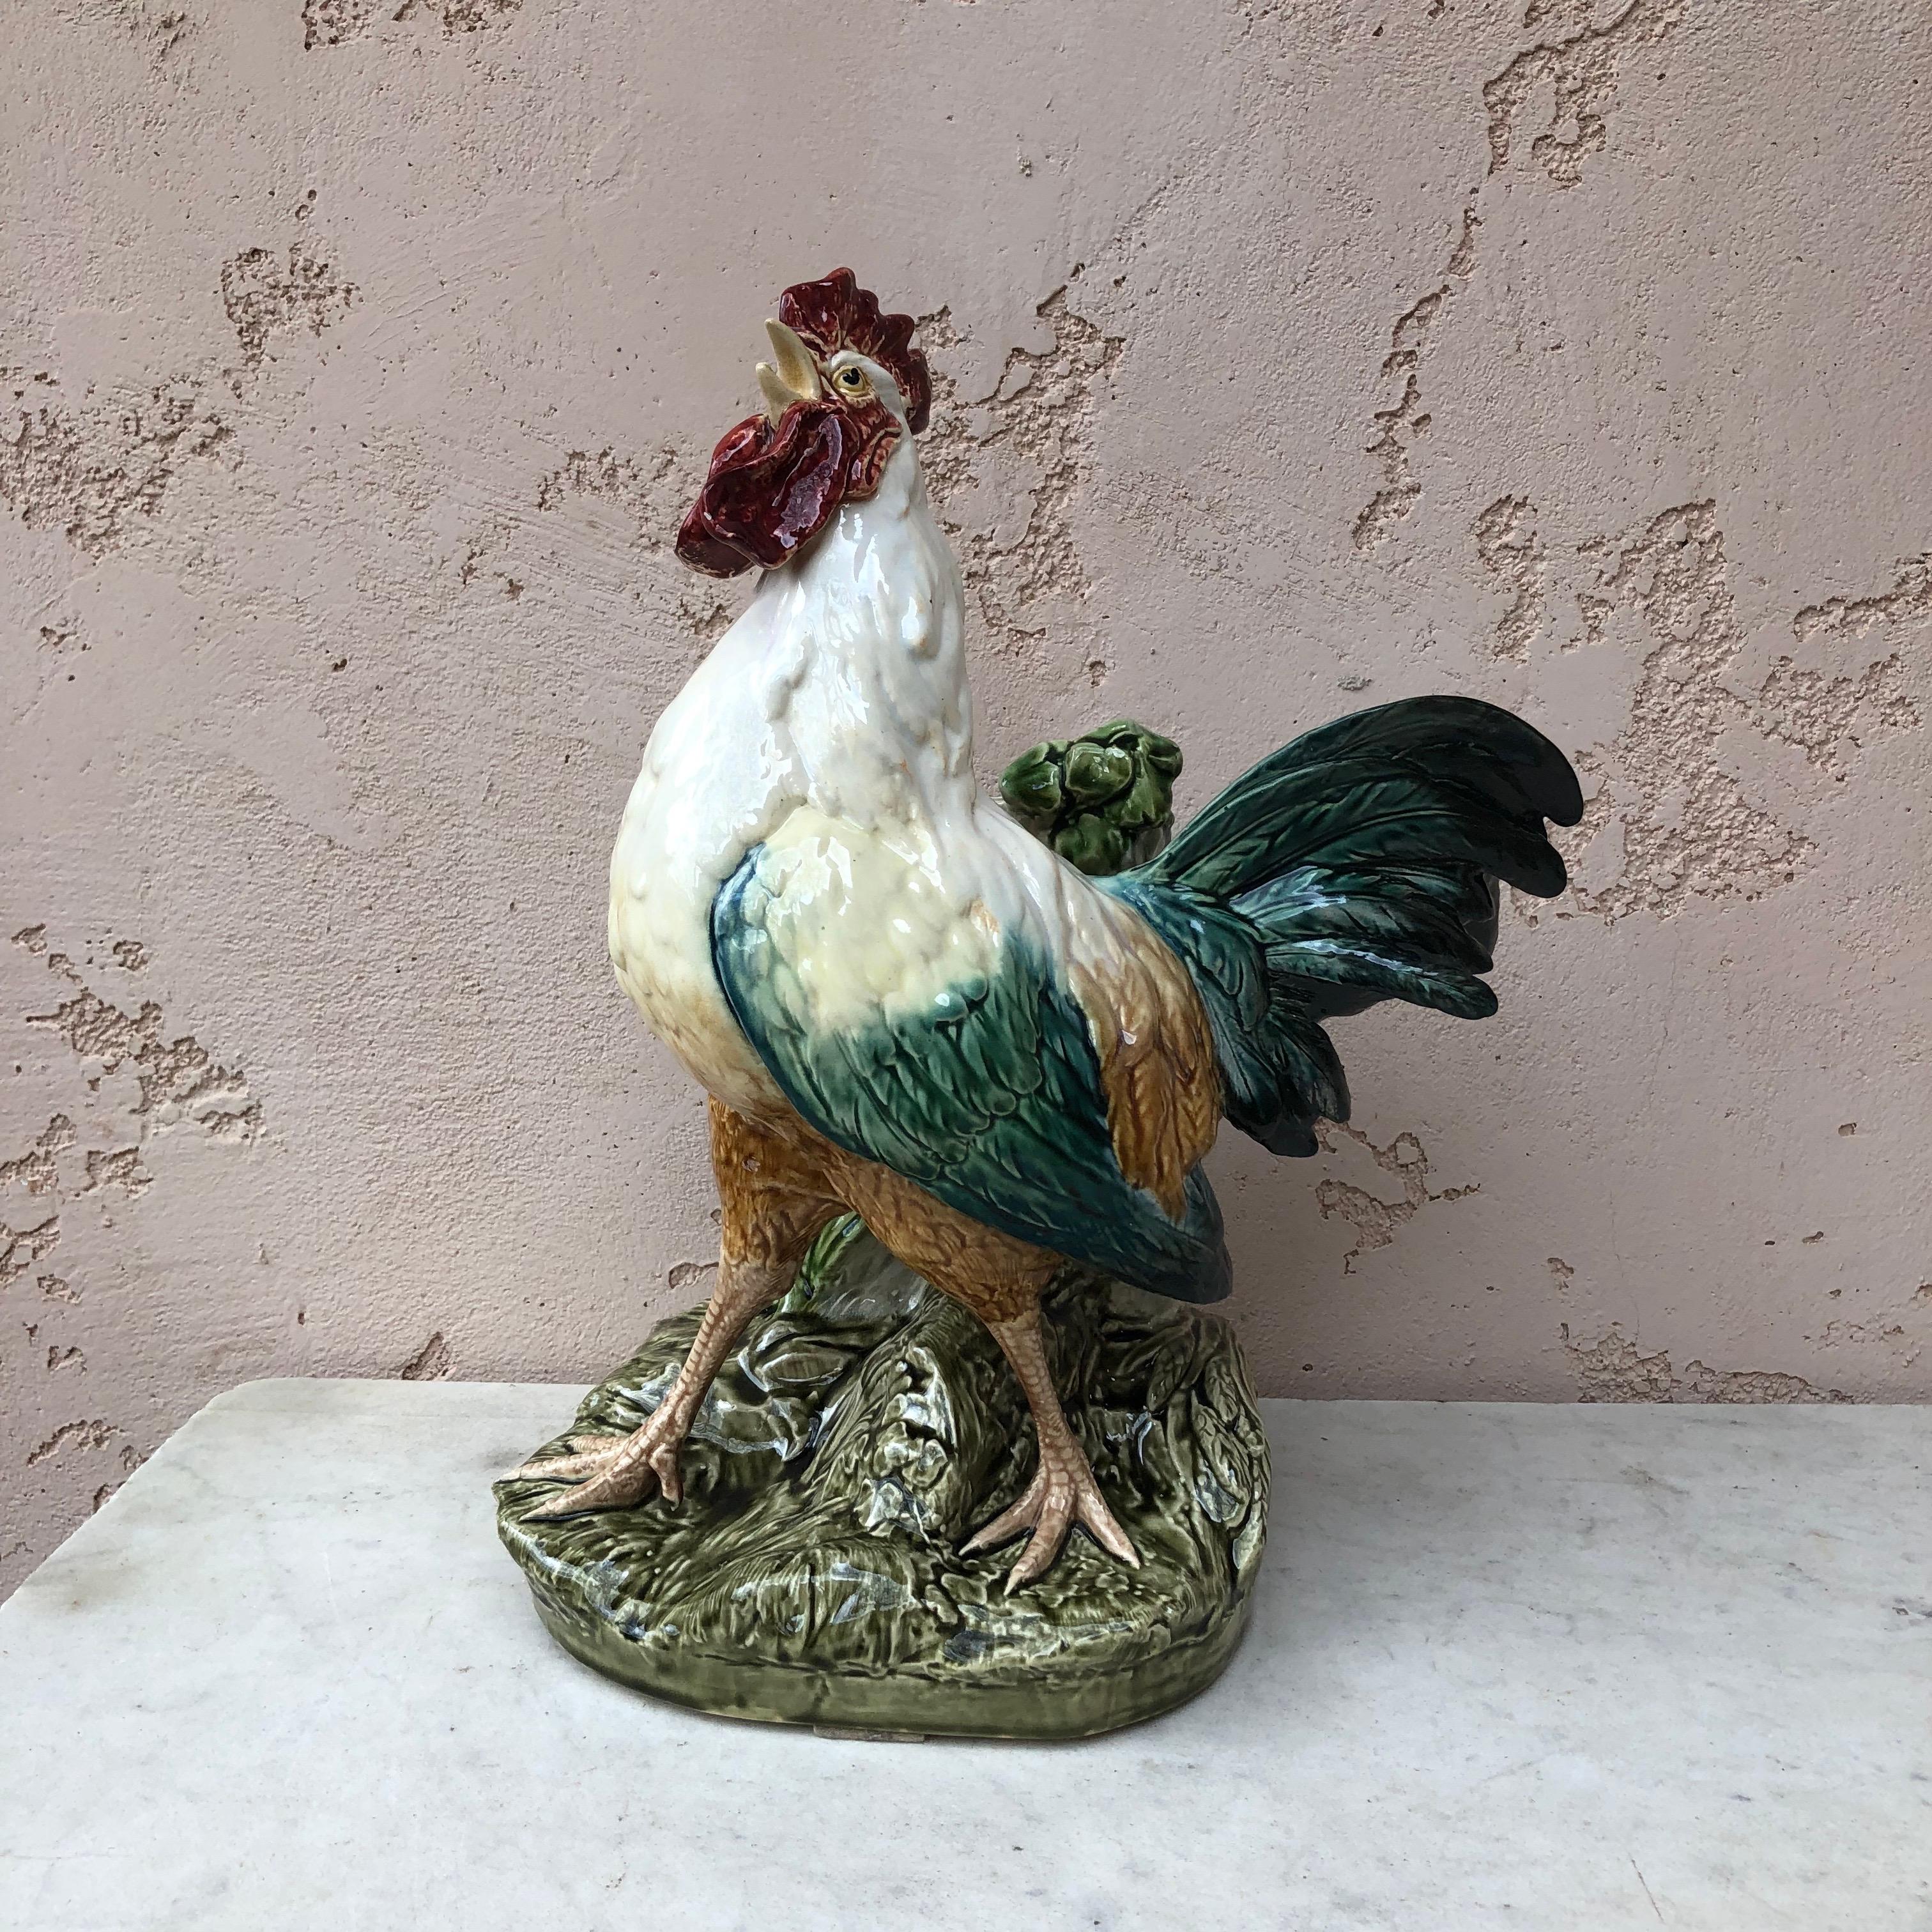 French Majolica rooster vase signed Carrier Belleuse for the manufacture of Choisy le Roi, circa 1875.
Very rare colors.

Albert-Ernest Carrier-Belleuse (born Albert-Ernest Carrier de Belleuse; 12 June 1824 – 4 June 1887) was a French sculptor.